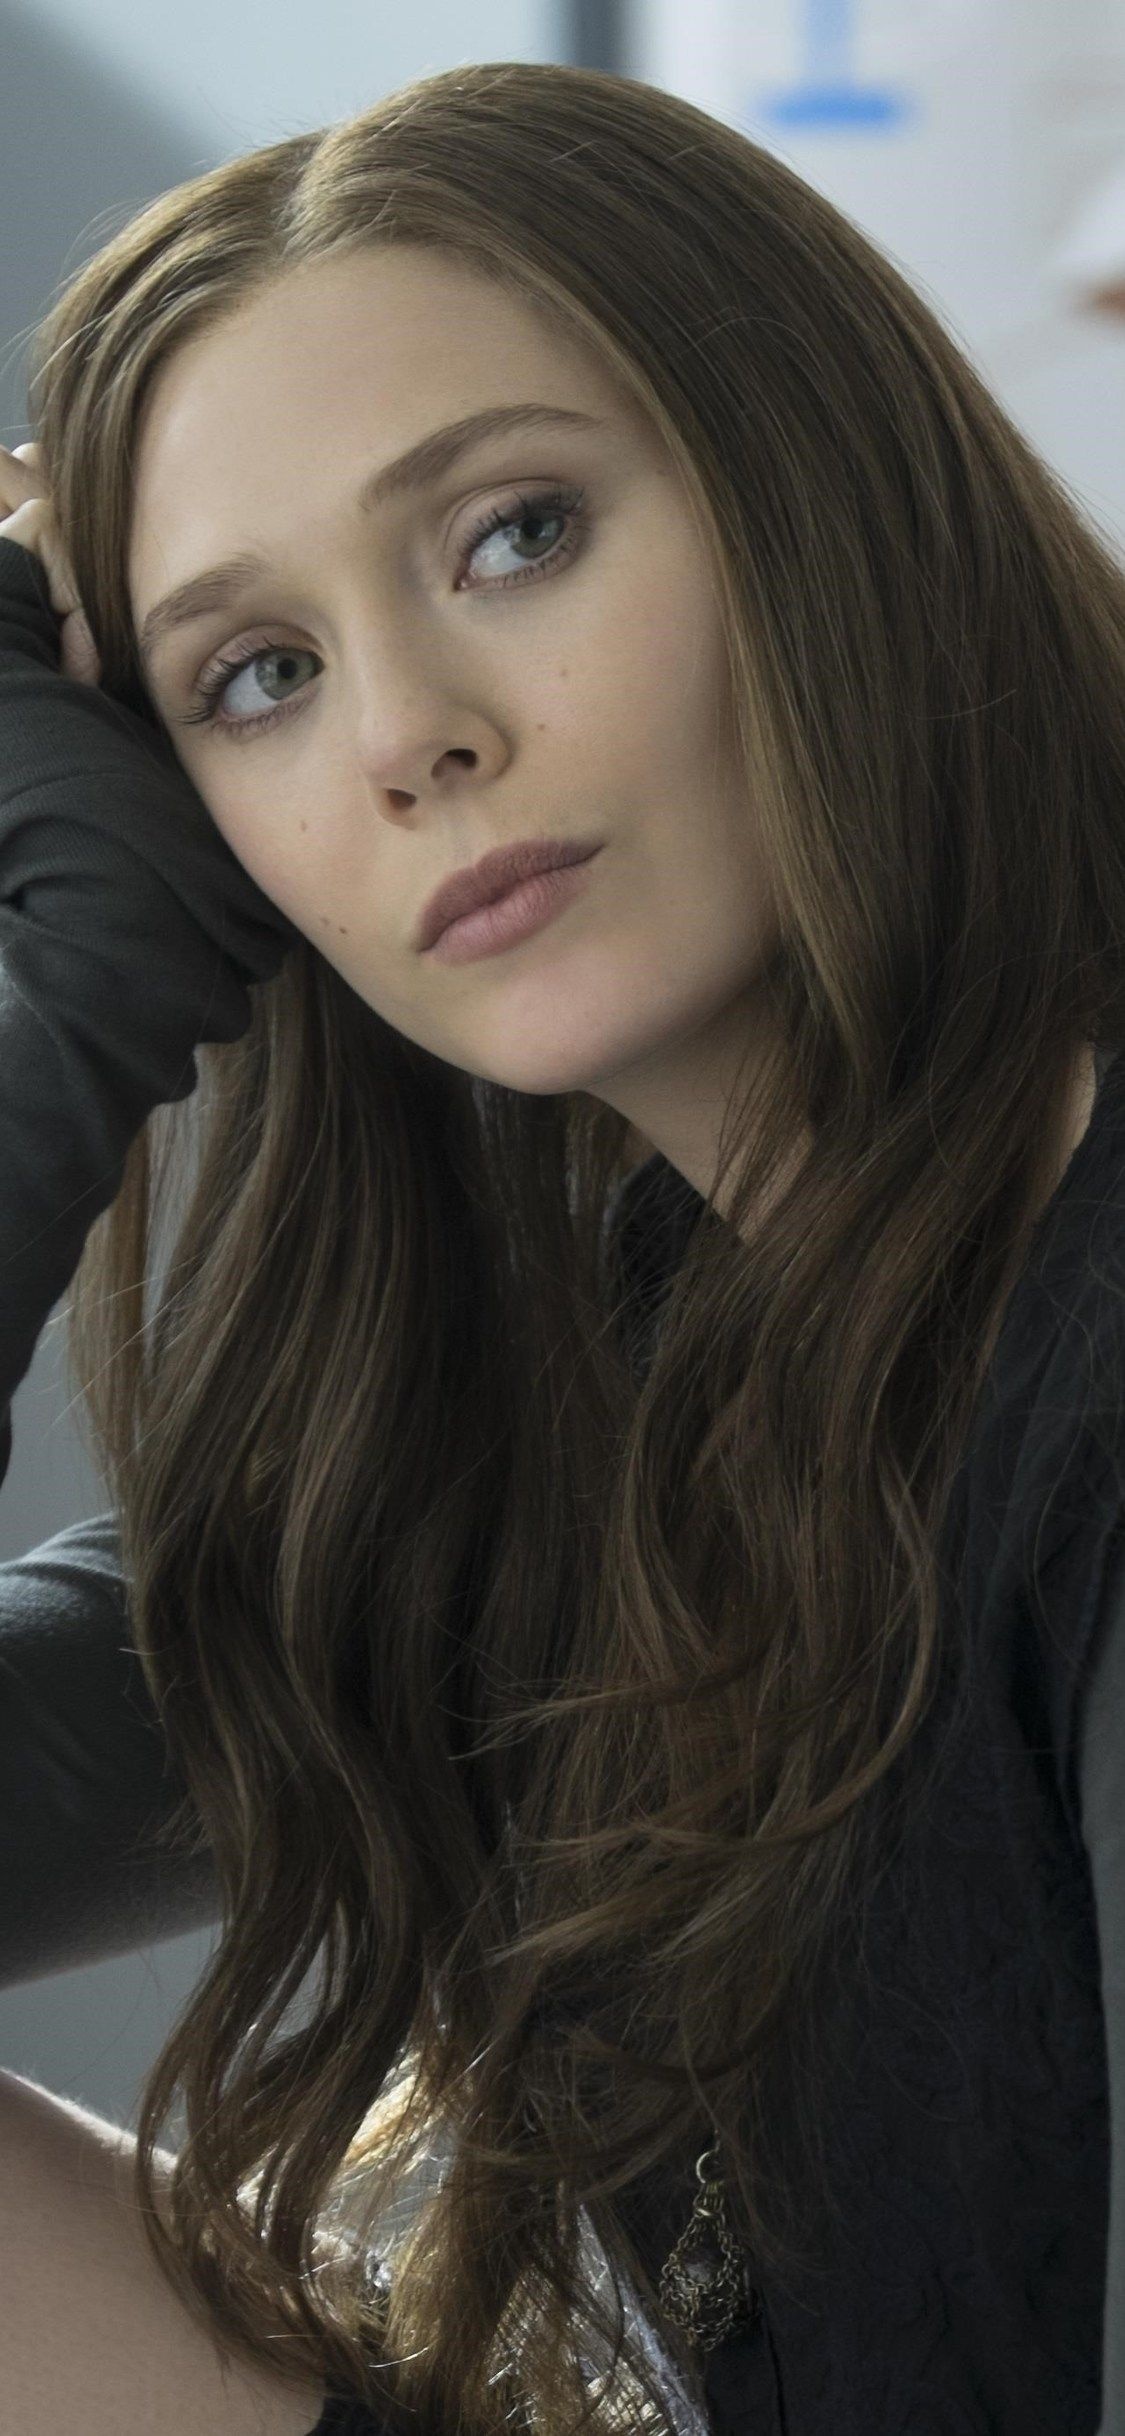 Scarlet Witch, Elizabeth Olsen wallpapers, Scarlett Witch actress, Stunning images, 1130x2440 HD Handy